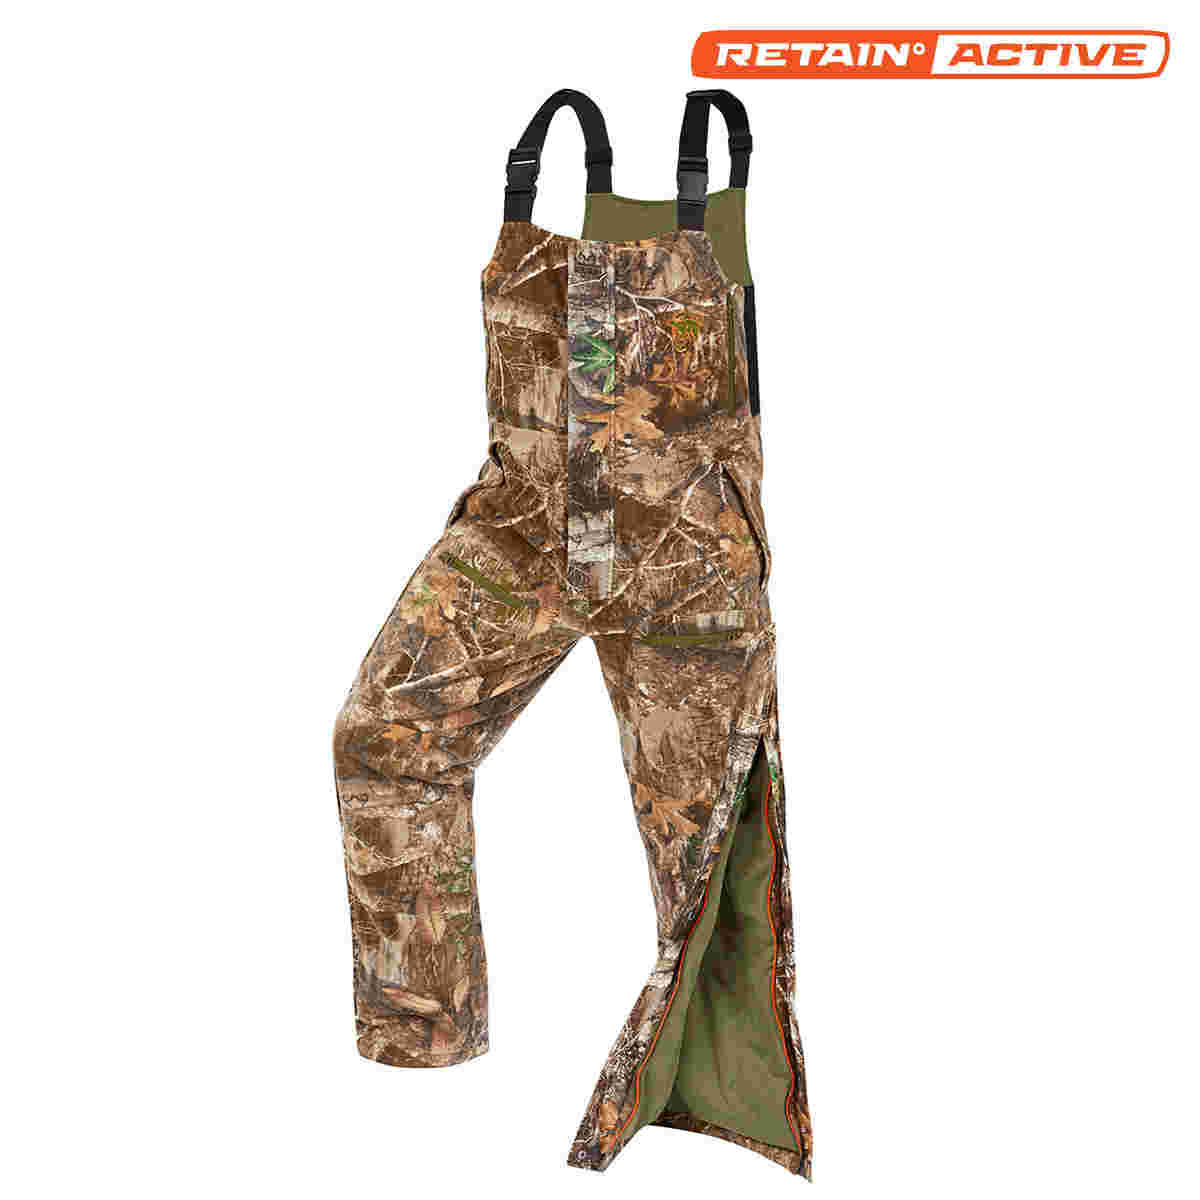 SHERPA FLEECE BALACLAVA - REALTREE Hunting | Systems and Collections EDGE® Outerwear ArcticShield